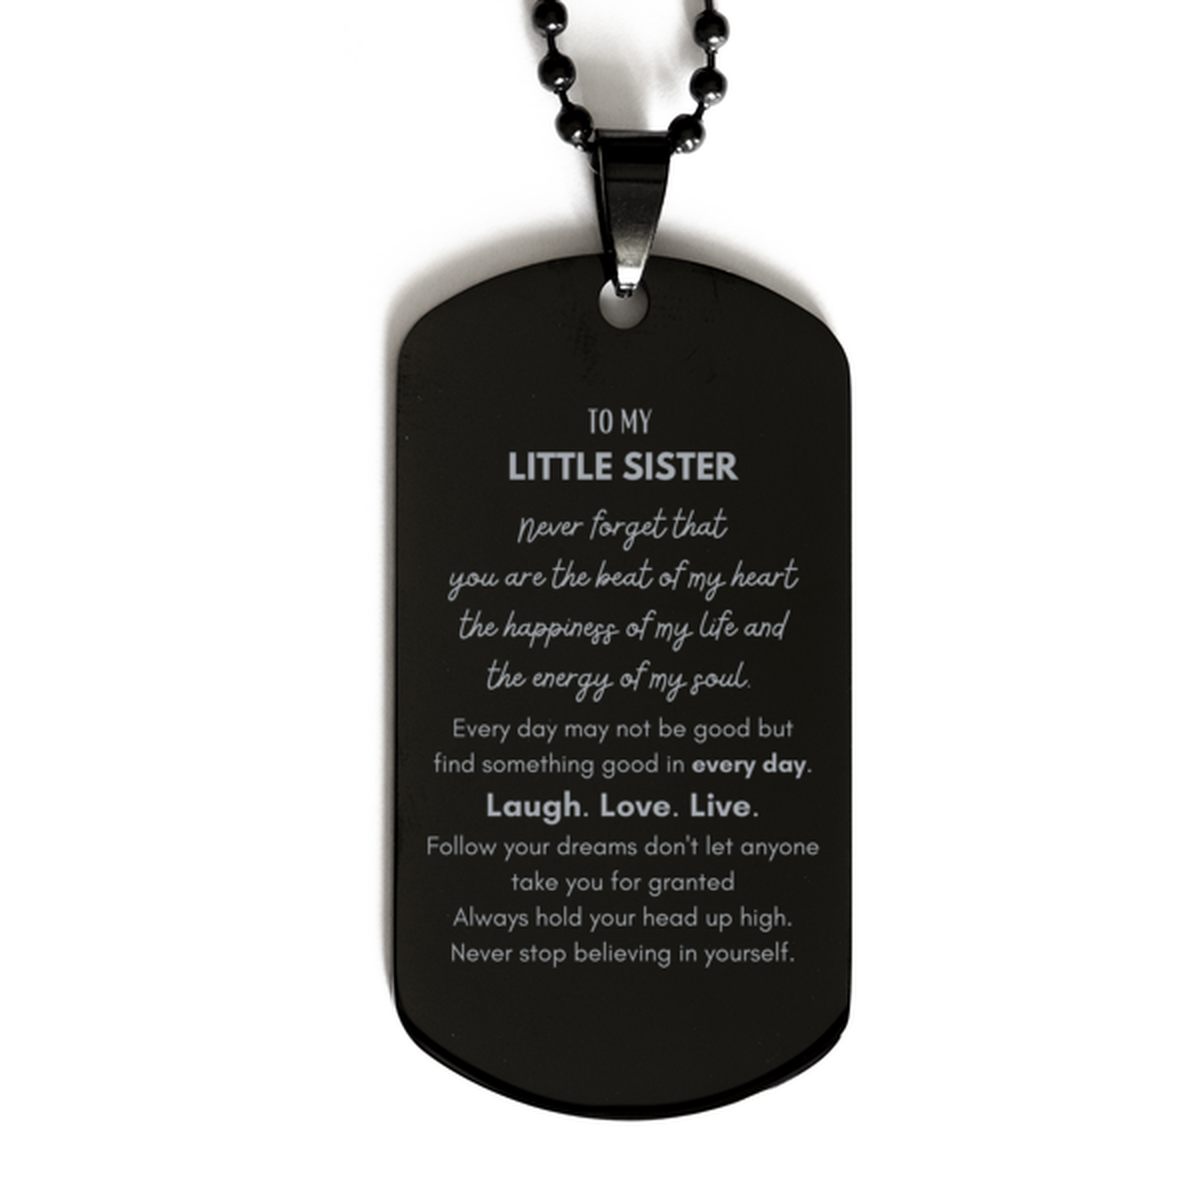 To My Little Sister Dogtag Gifts, Christmas Little Sister Black Dog Tag Present, Birthday Unique Motivational For Little Sister, To My Little Sister Never forget that you are the beat of my heart the happiness of my life and the energy of my soul